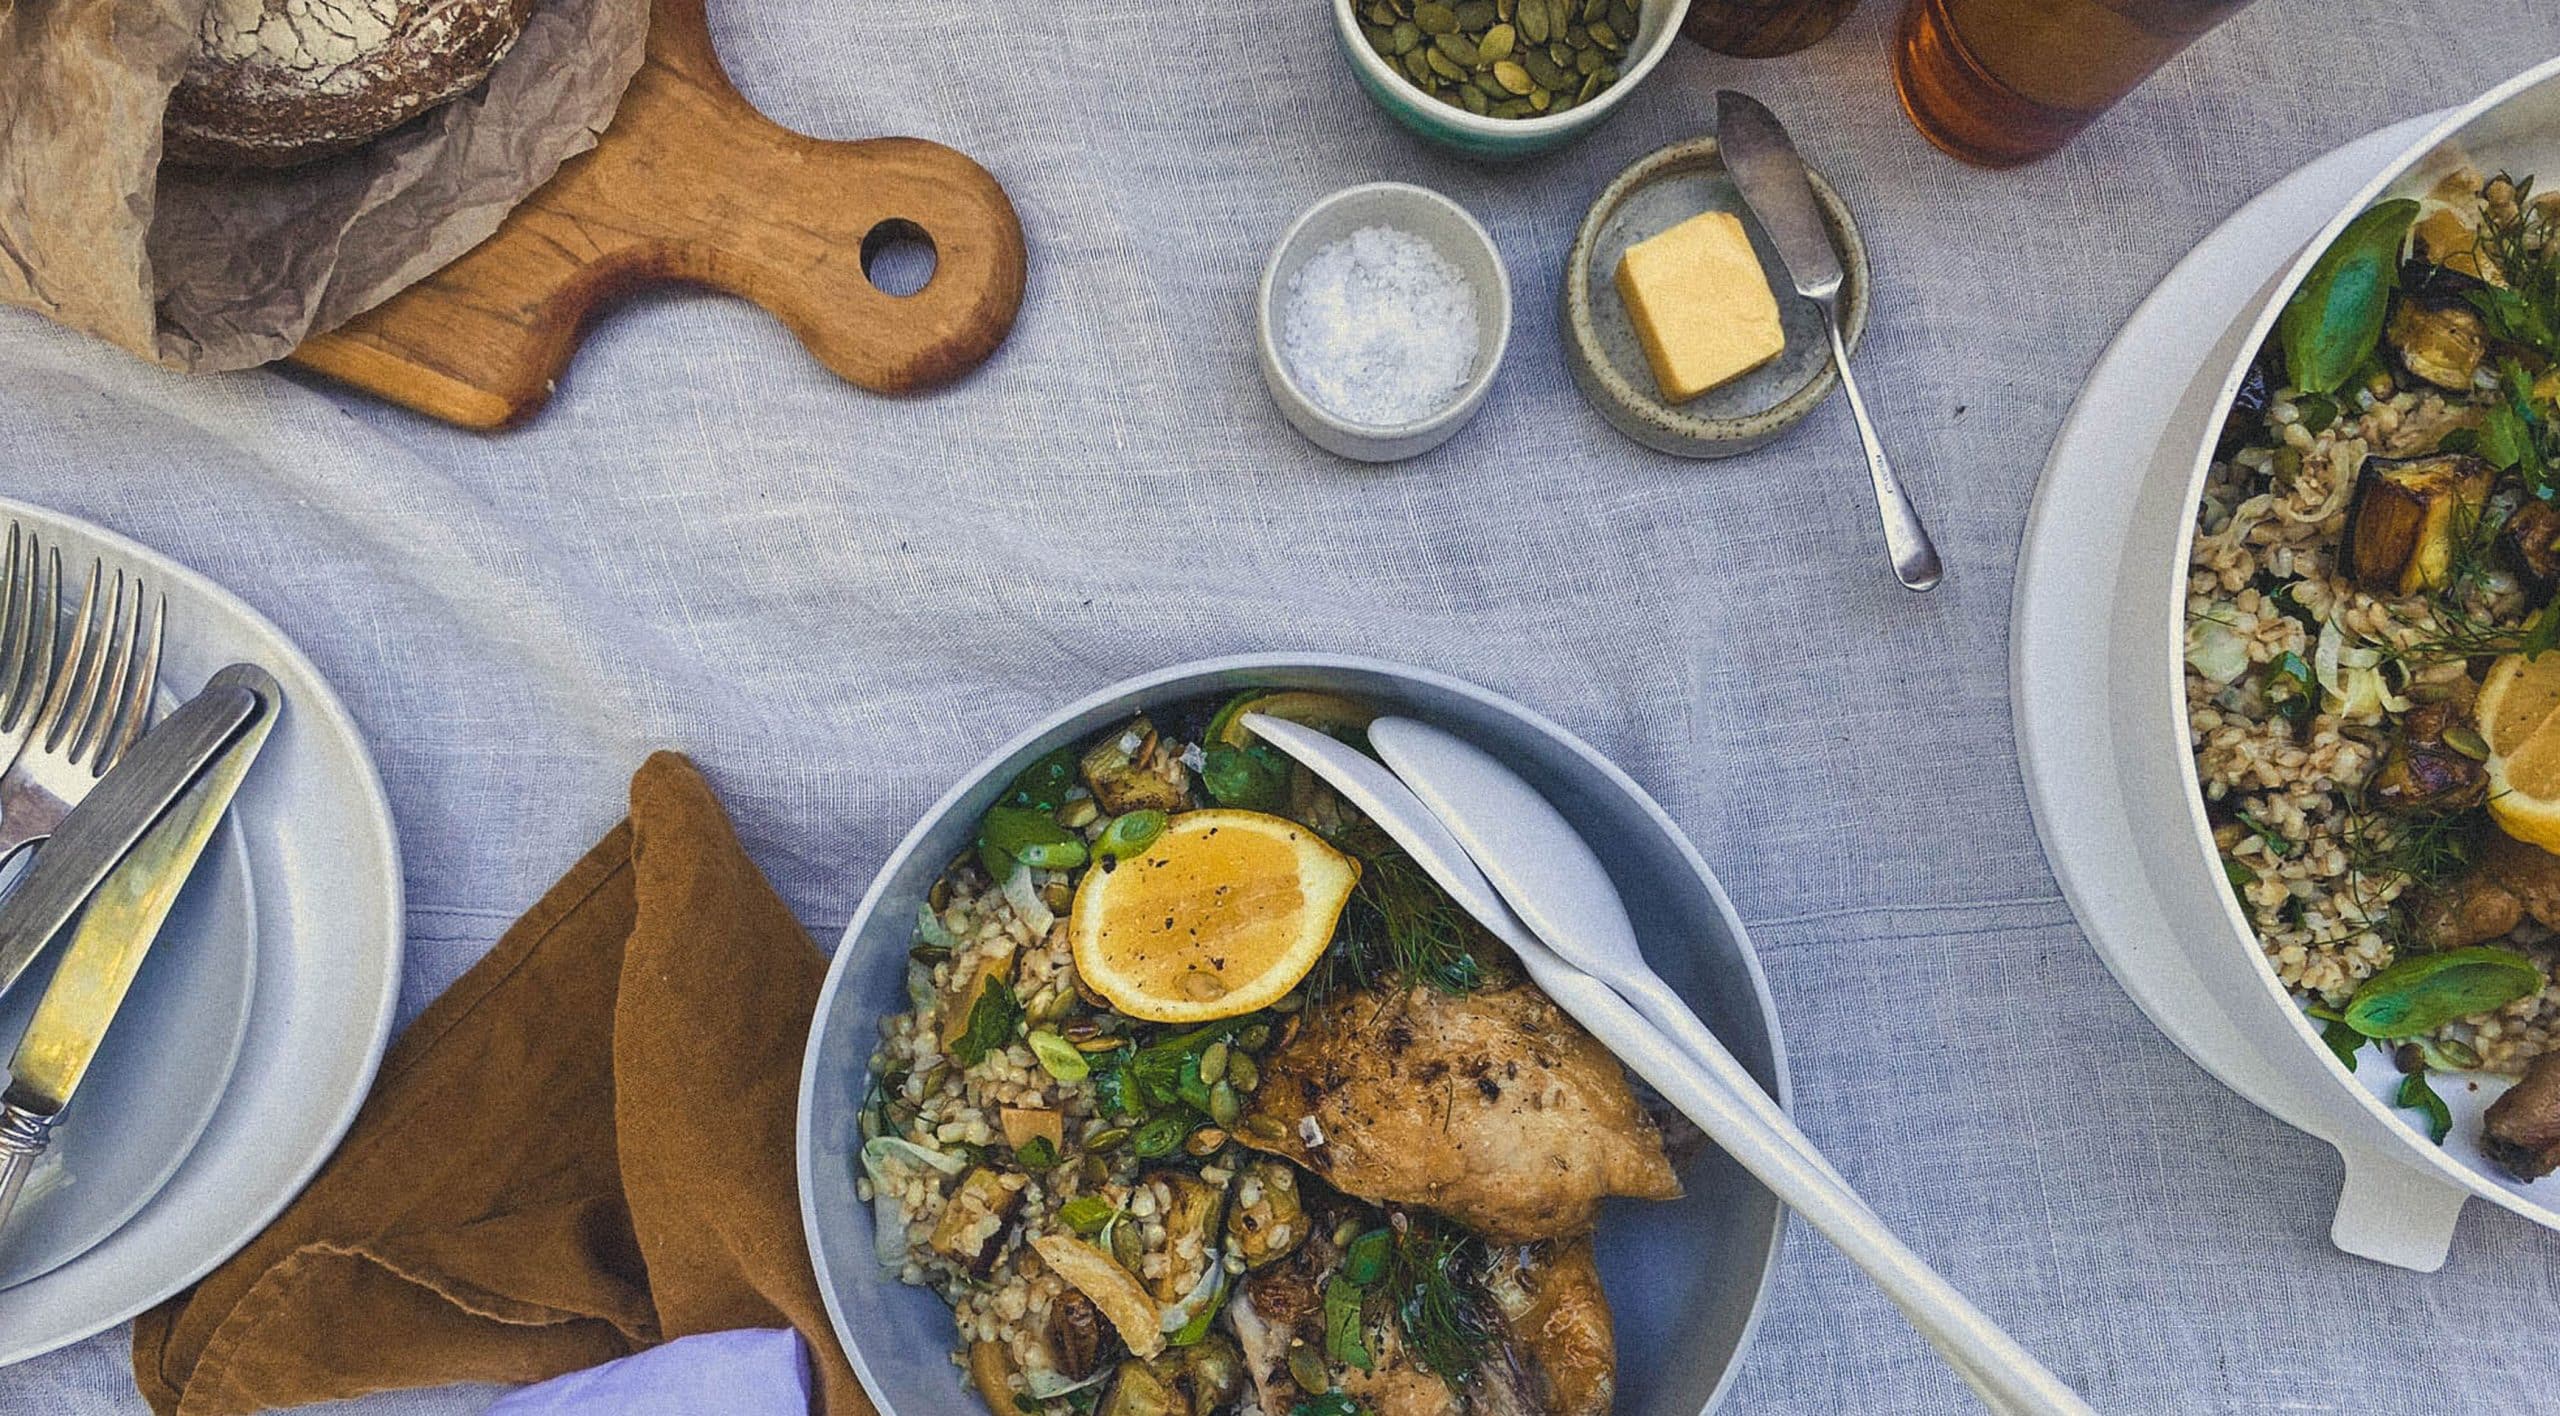 styleware-style-files-from-our-kitchen-lemony-roasted-chicken-barley-grain-salad